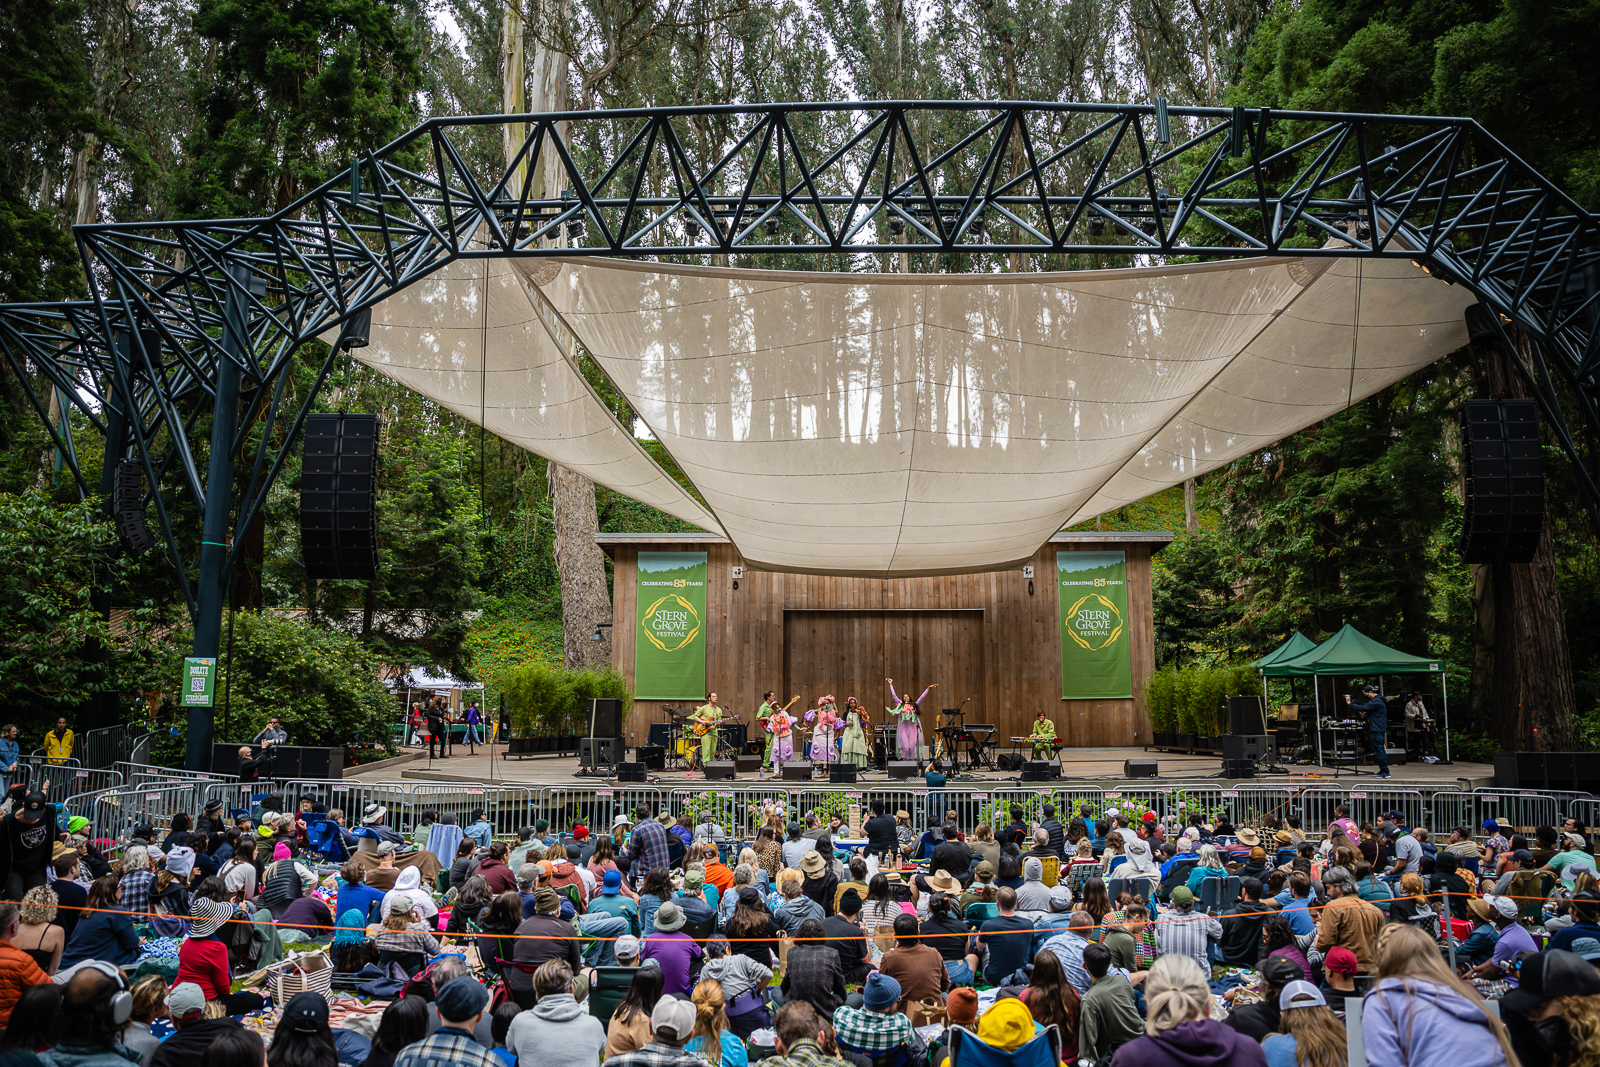 The Stern Grove Festival is the oldest music festival in the San Francisco Bay Area.